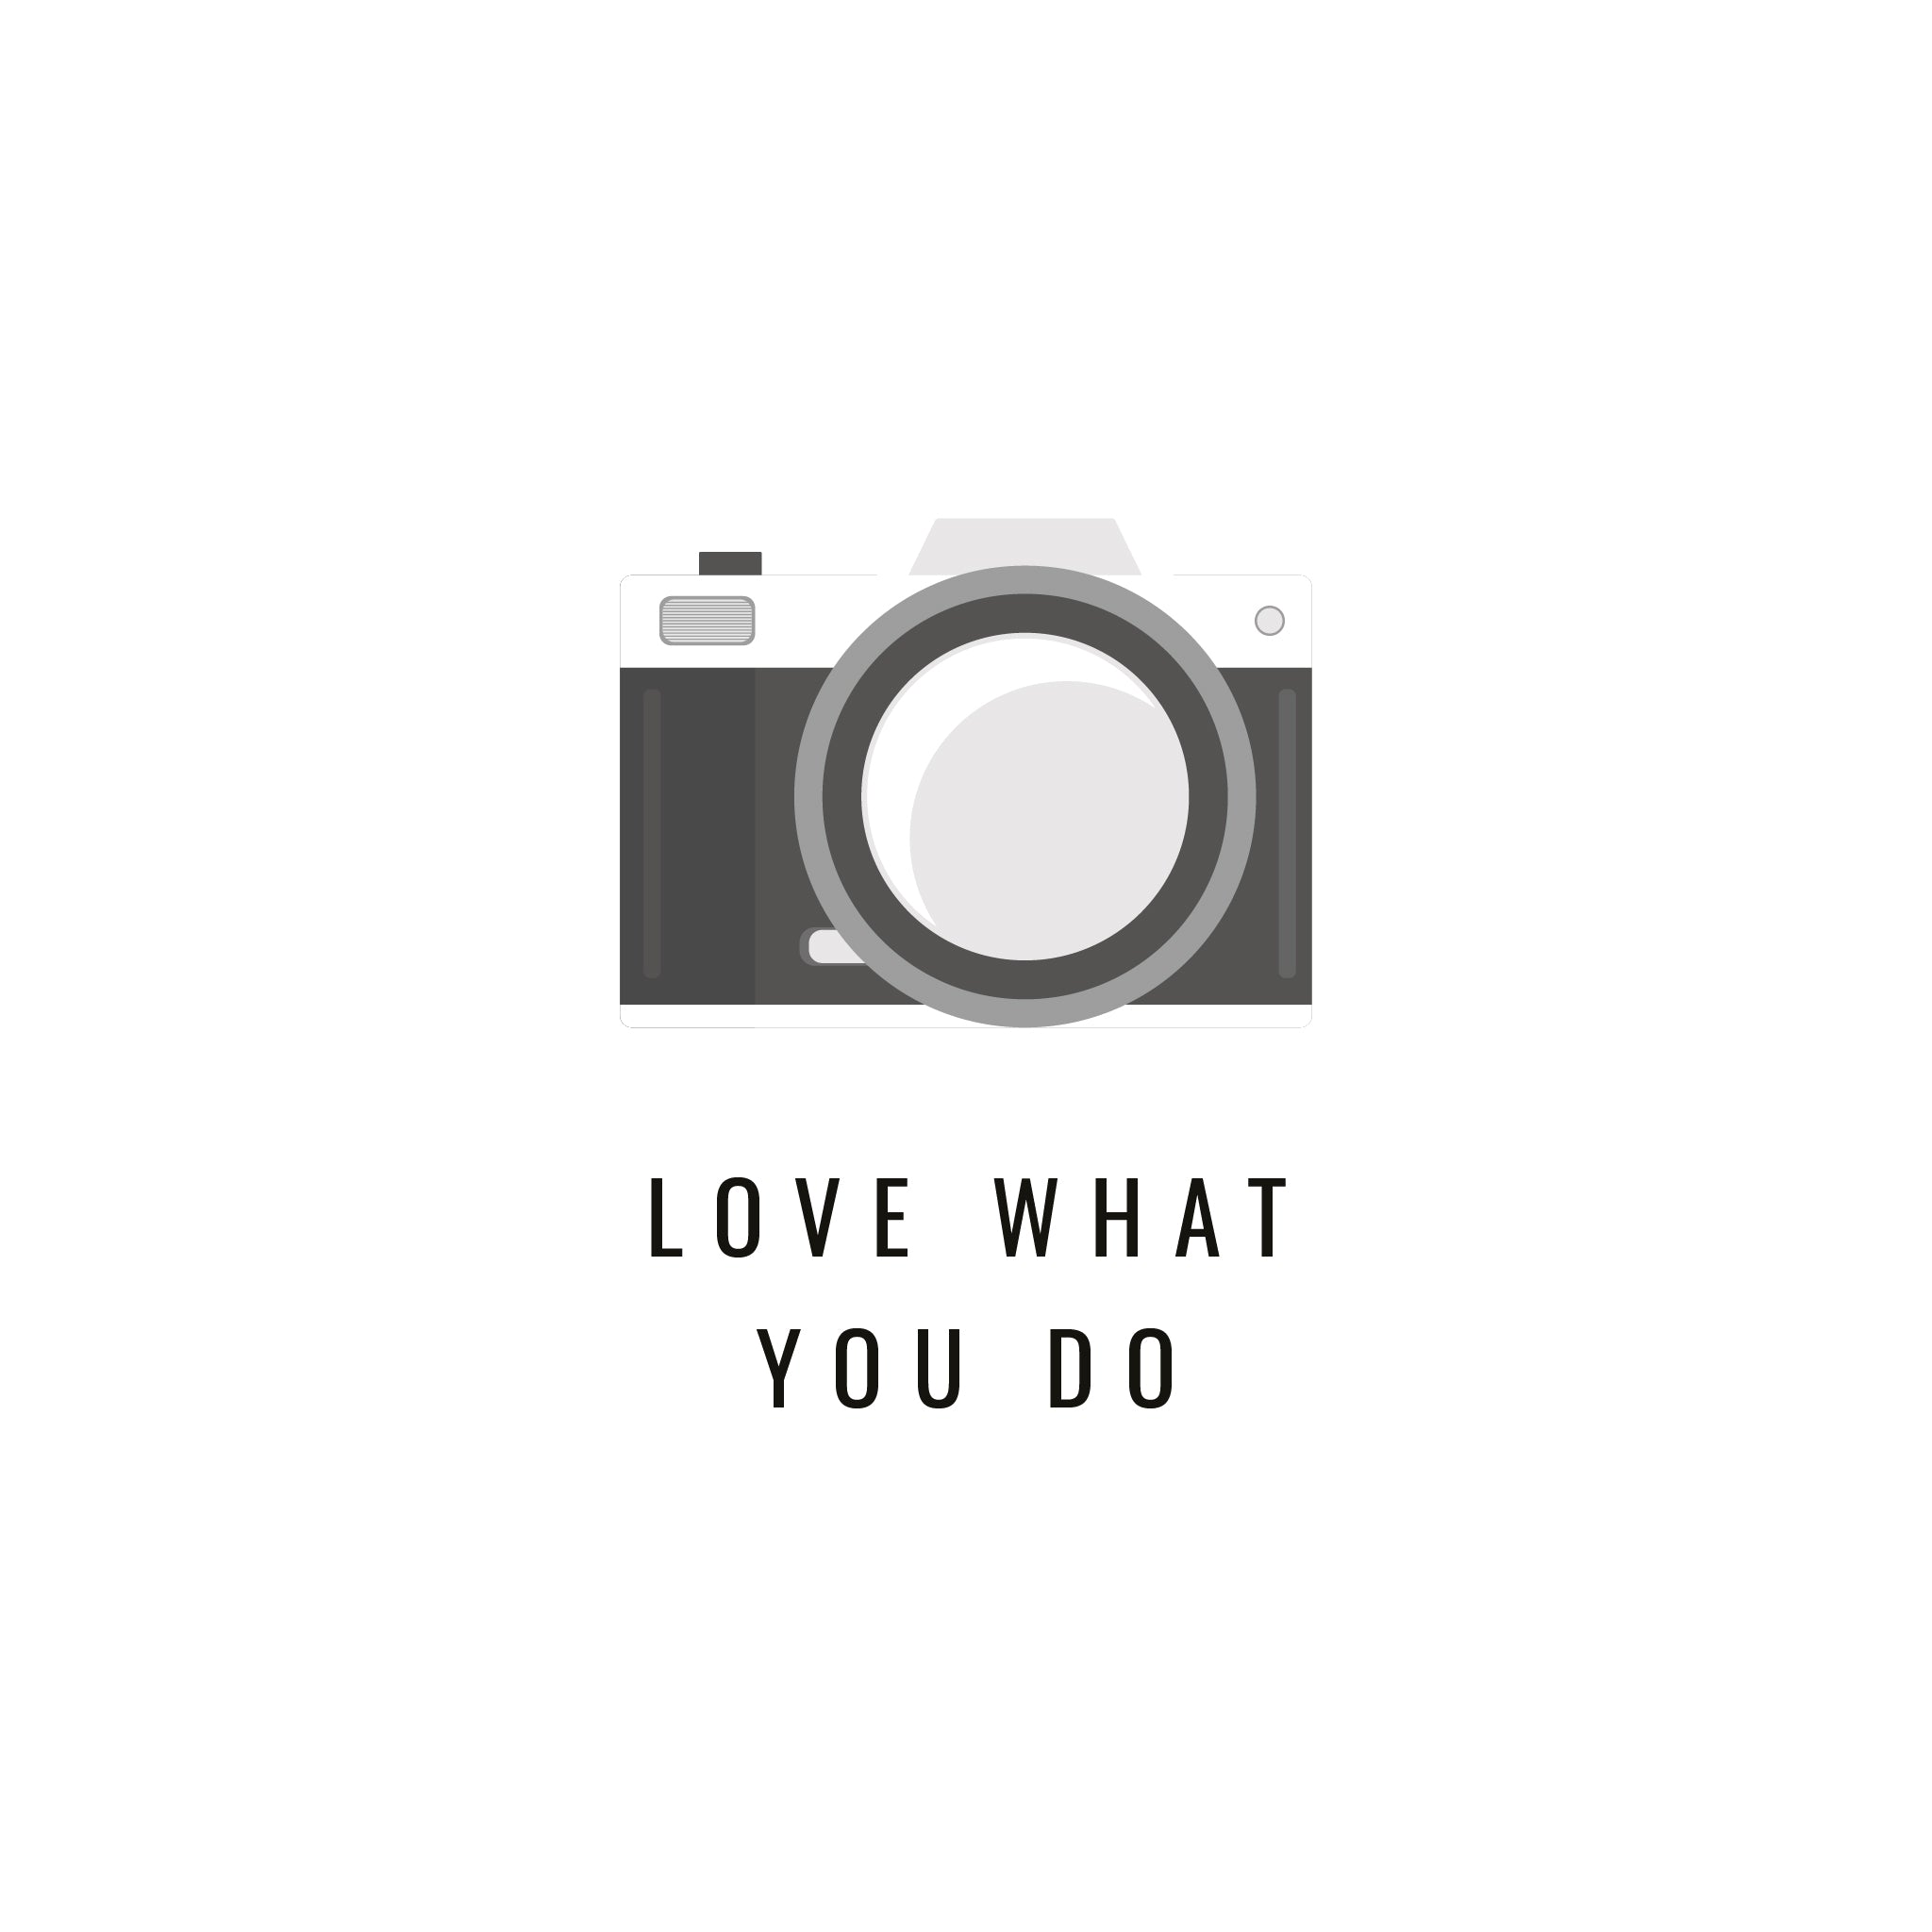 Instee Love What You Do 4 T-shirt Unisex 100% Cotton